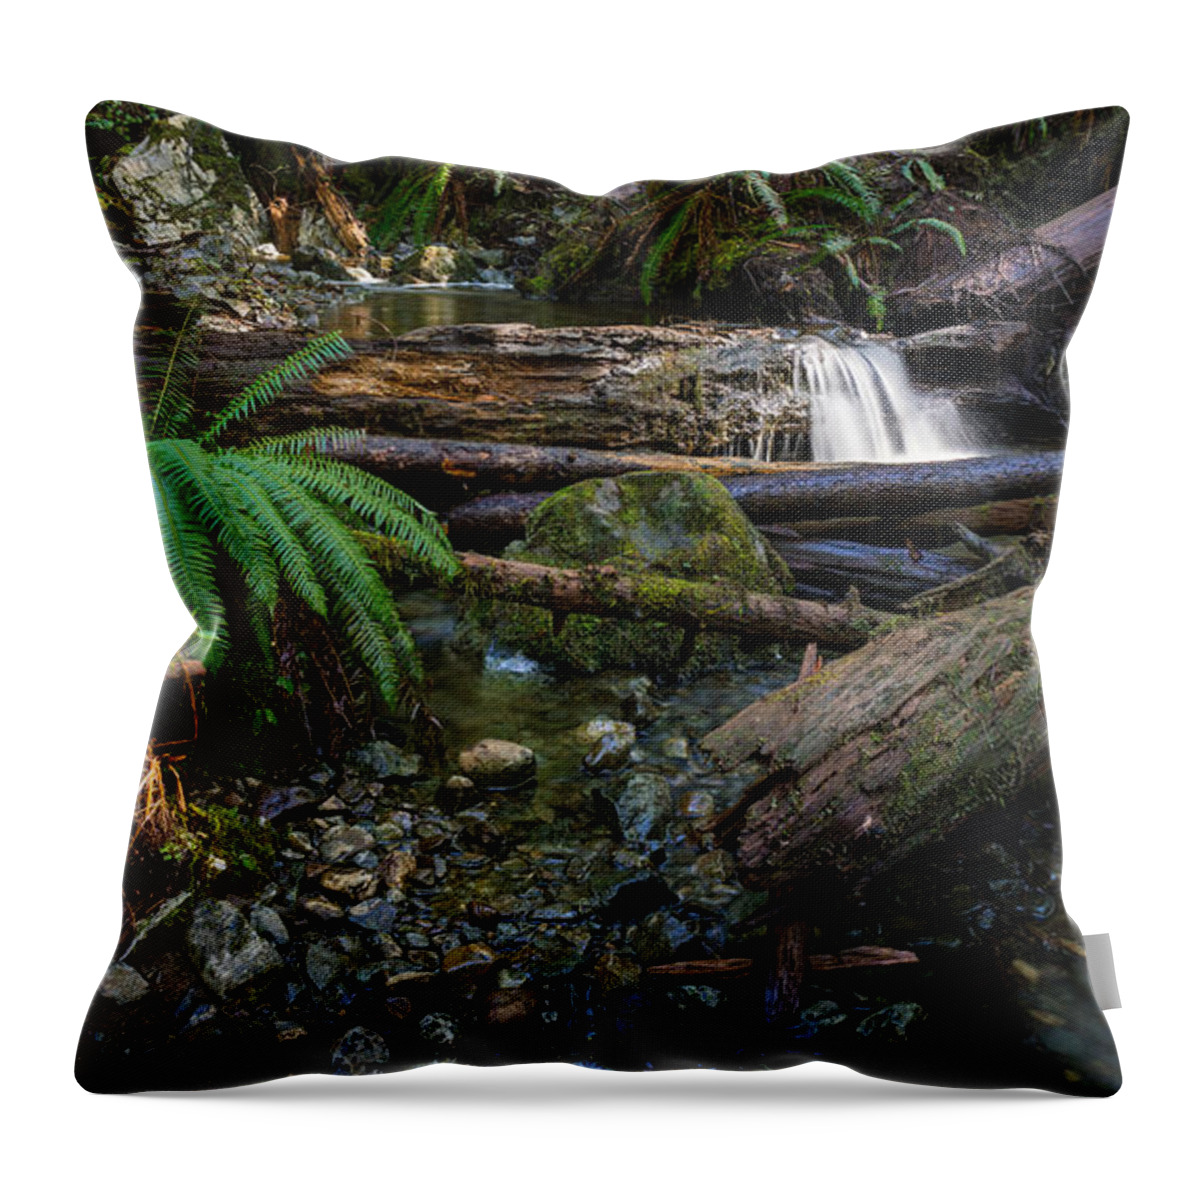 Avatar Grove Throw Pillow featuring the photograph Avatar Grove Creek Bed by Carrie Cole